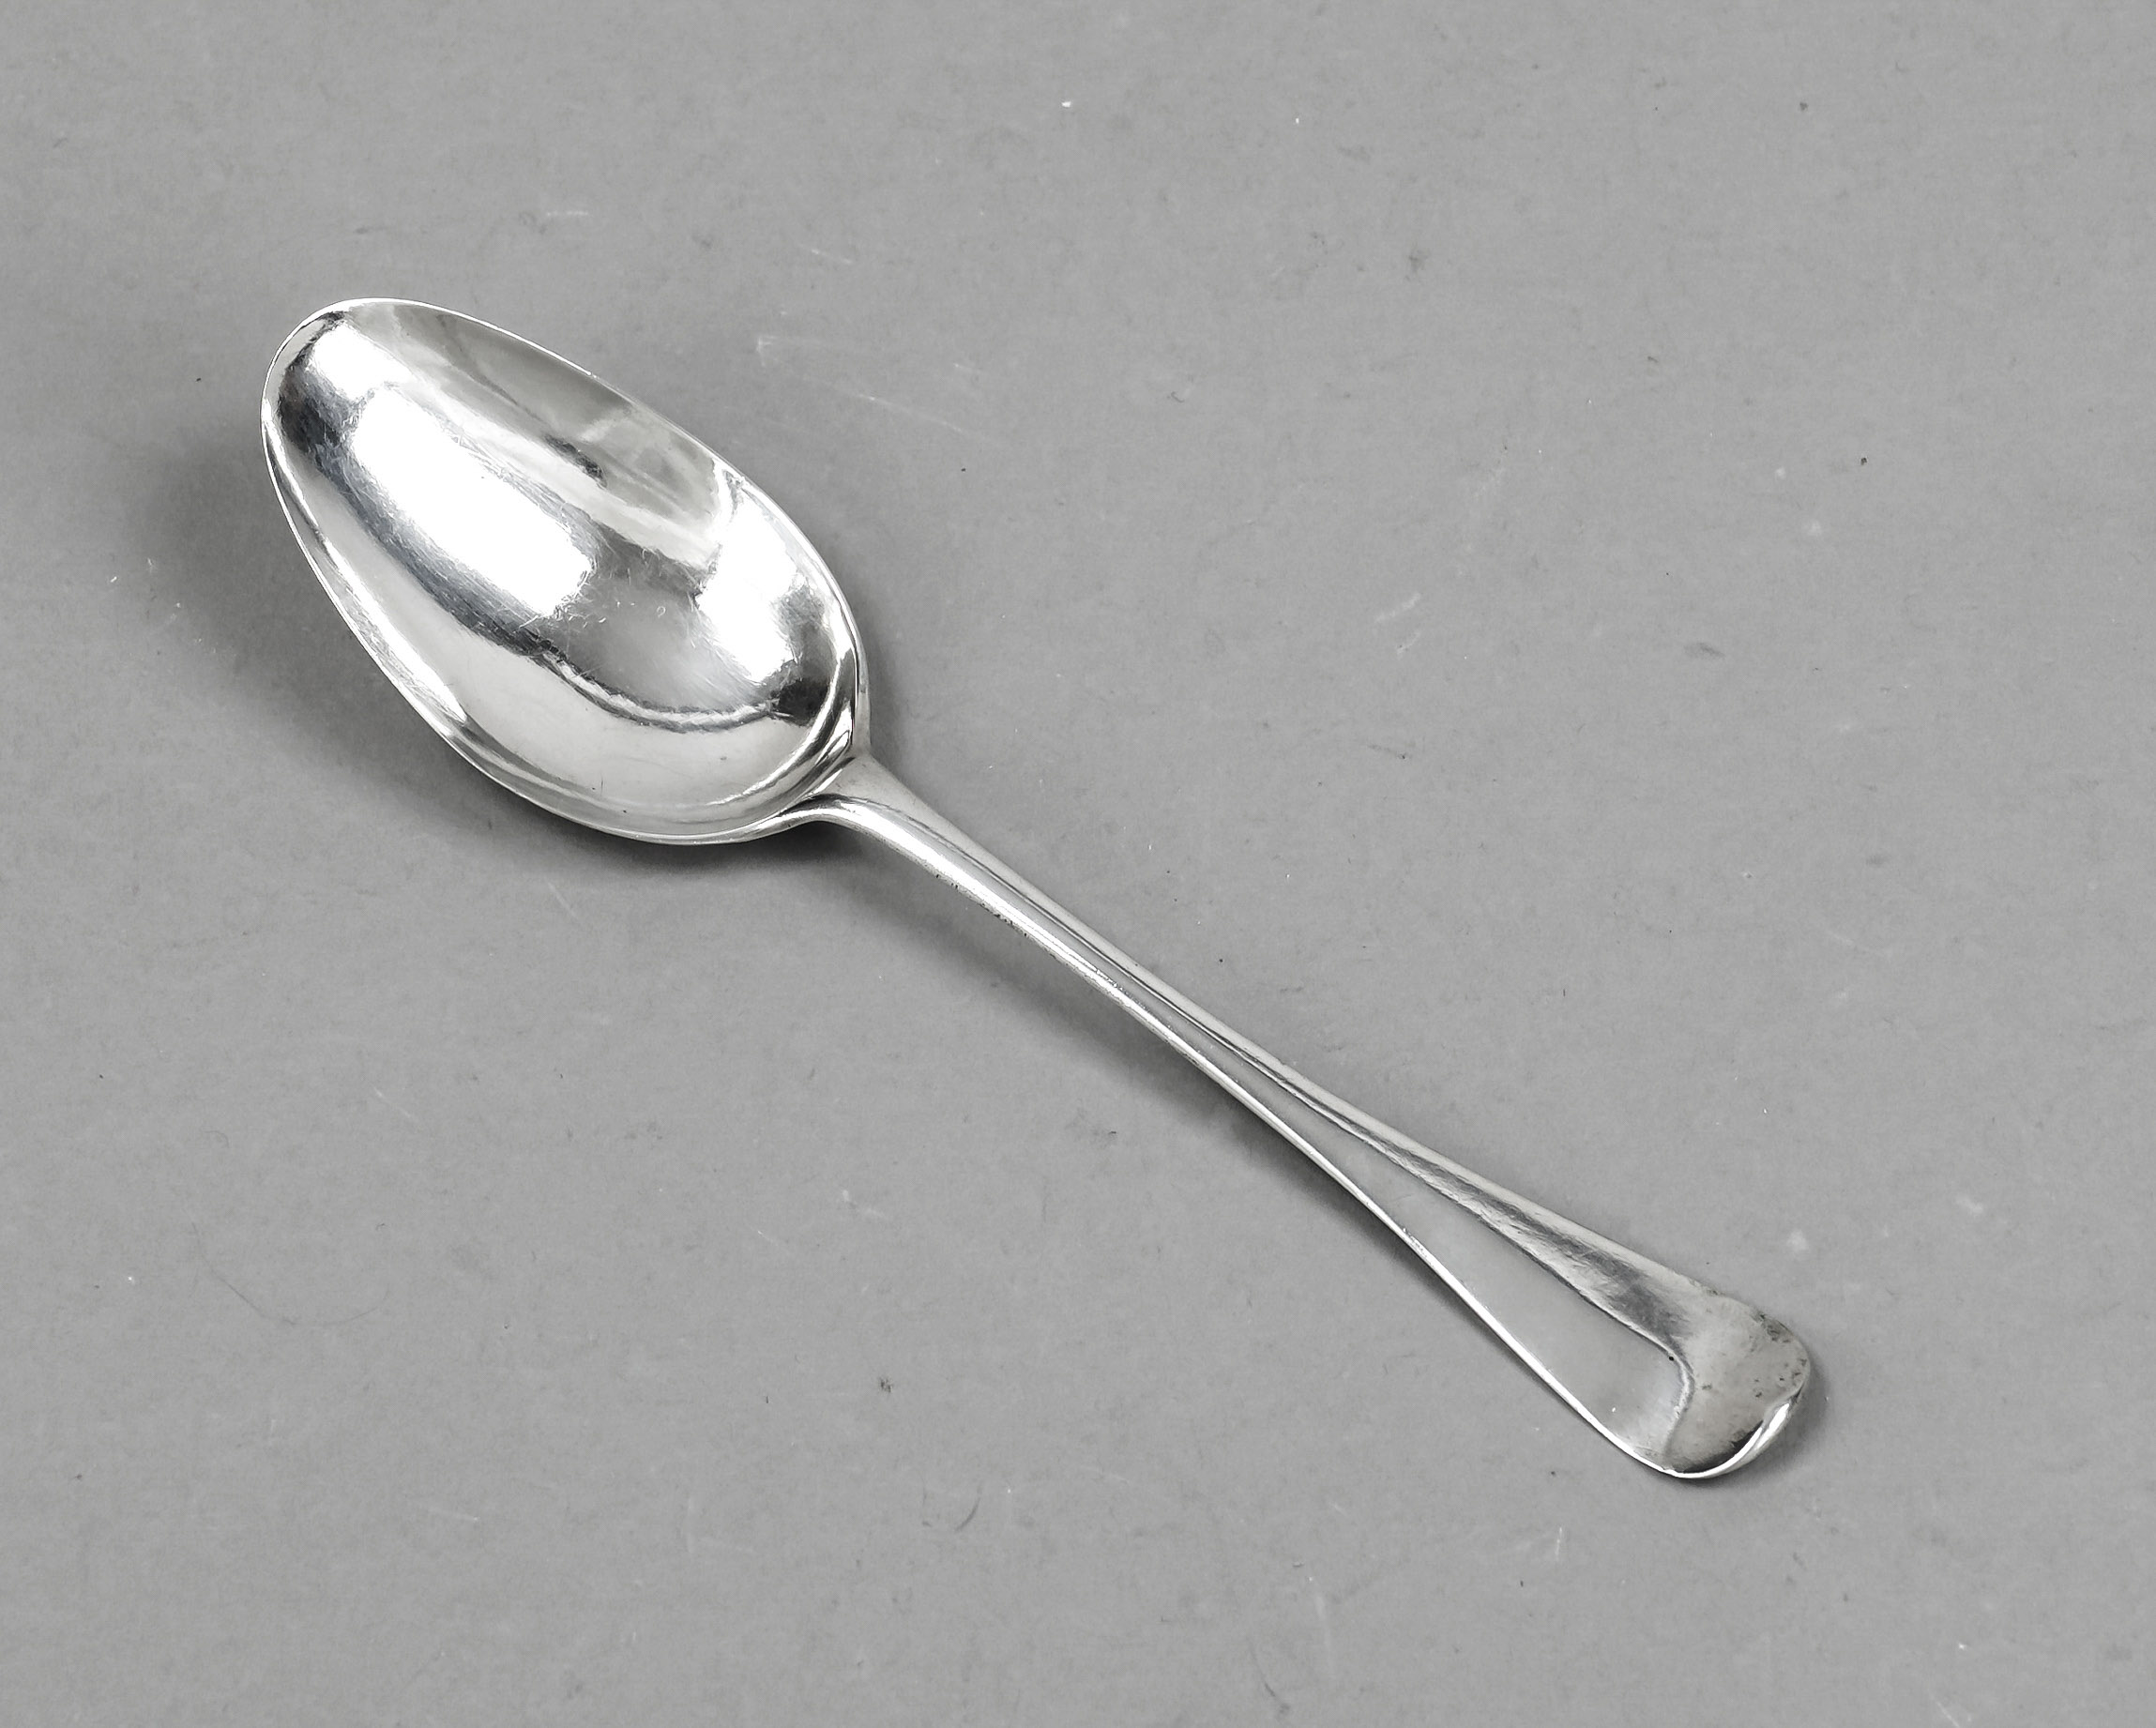 A serving spoon, probably German, mid 18th century, silver tested, oval bowl, rounded handle finial,